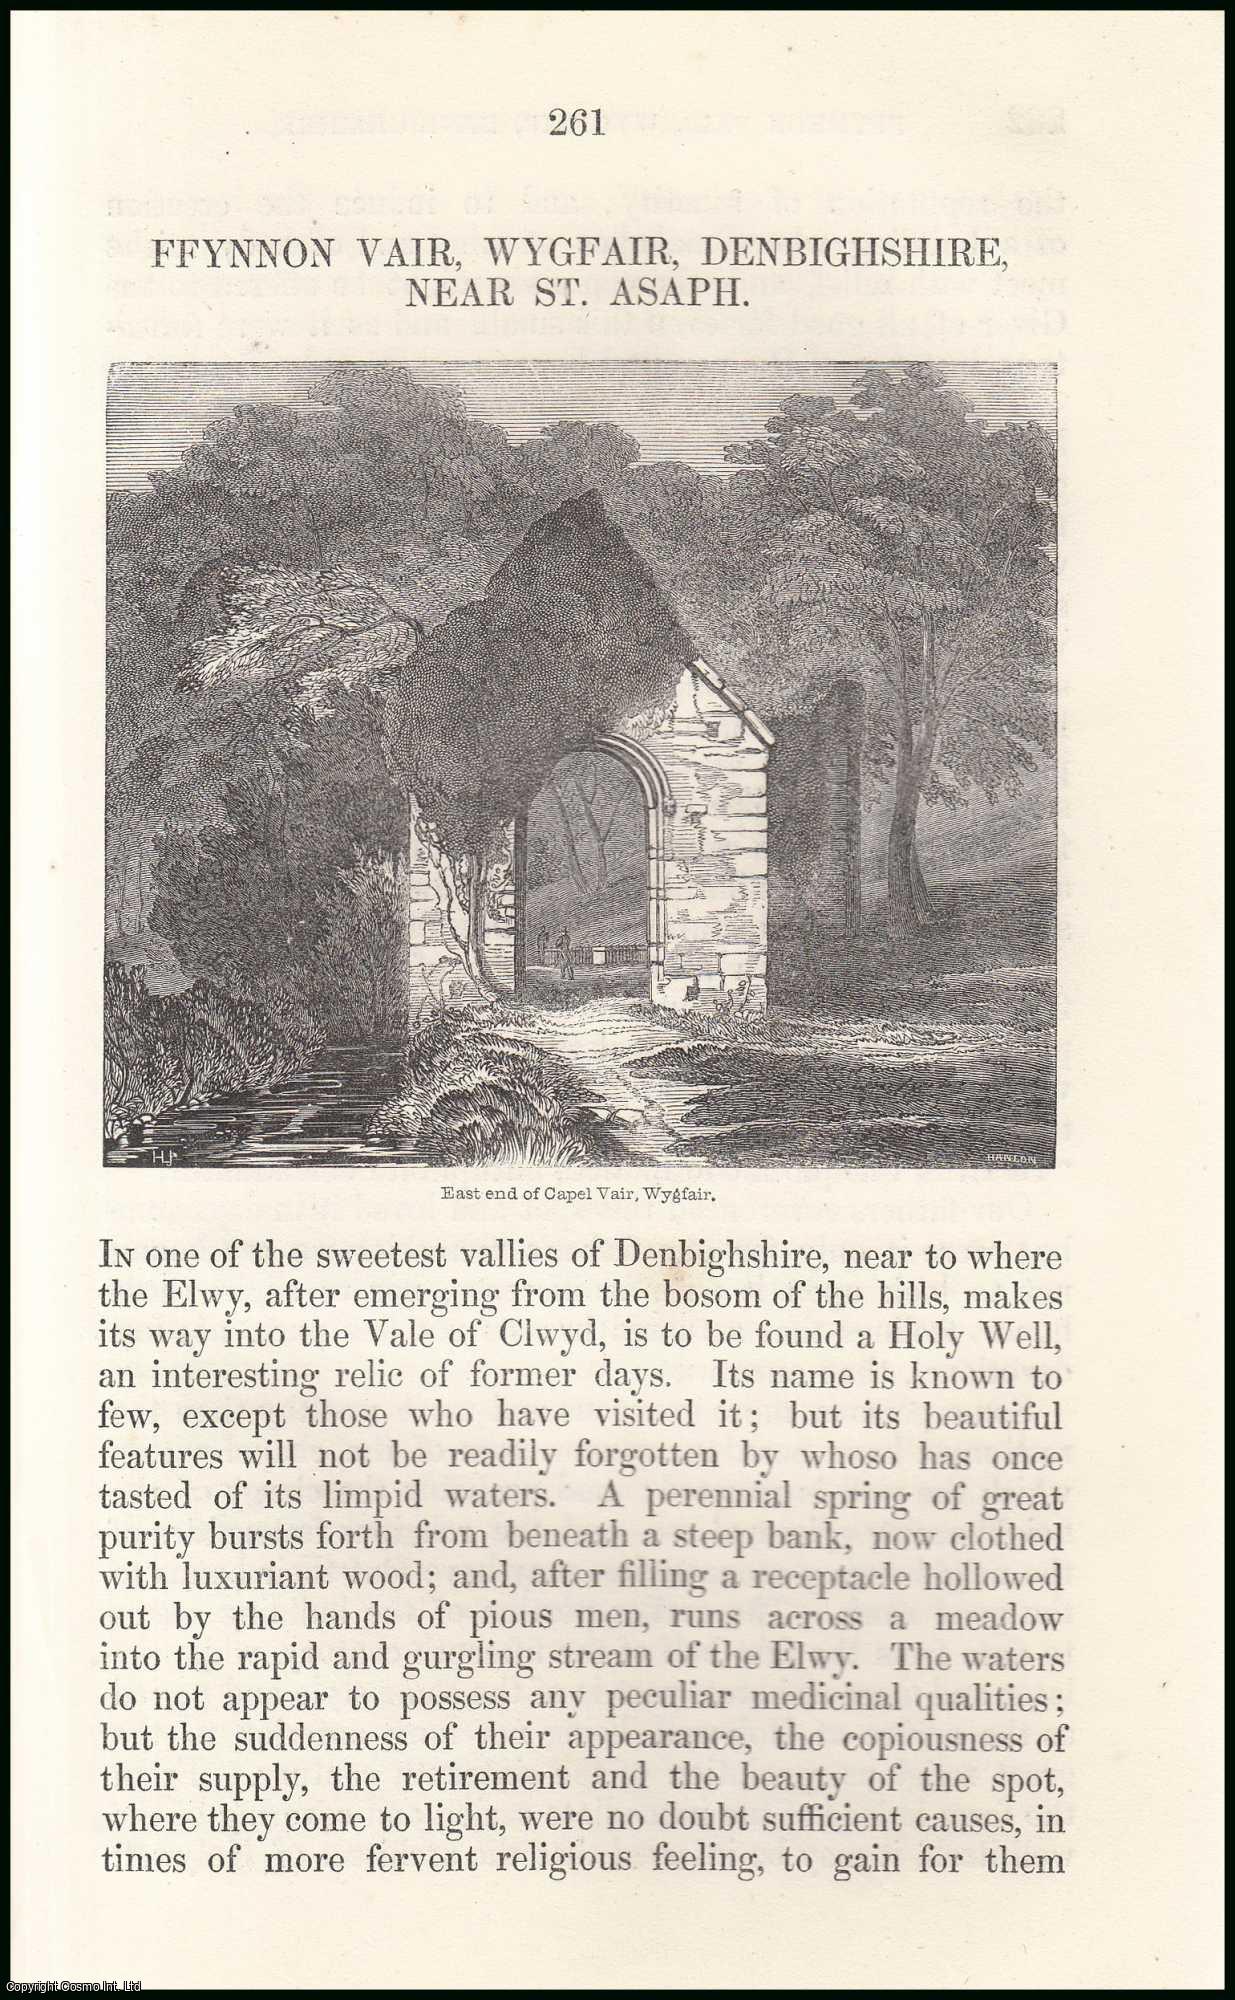 H.L.J. - Ffynnon Vair, Wygfair, Denbighshire, Near St. Asaph. An original article from the Archaeologia Cambrensis, a Record of The Antiquities of Wales & its Marches, 1847.